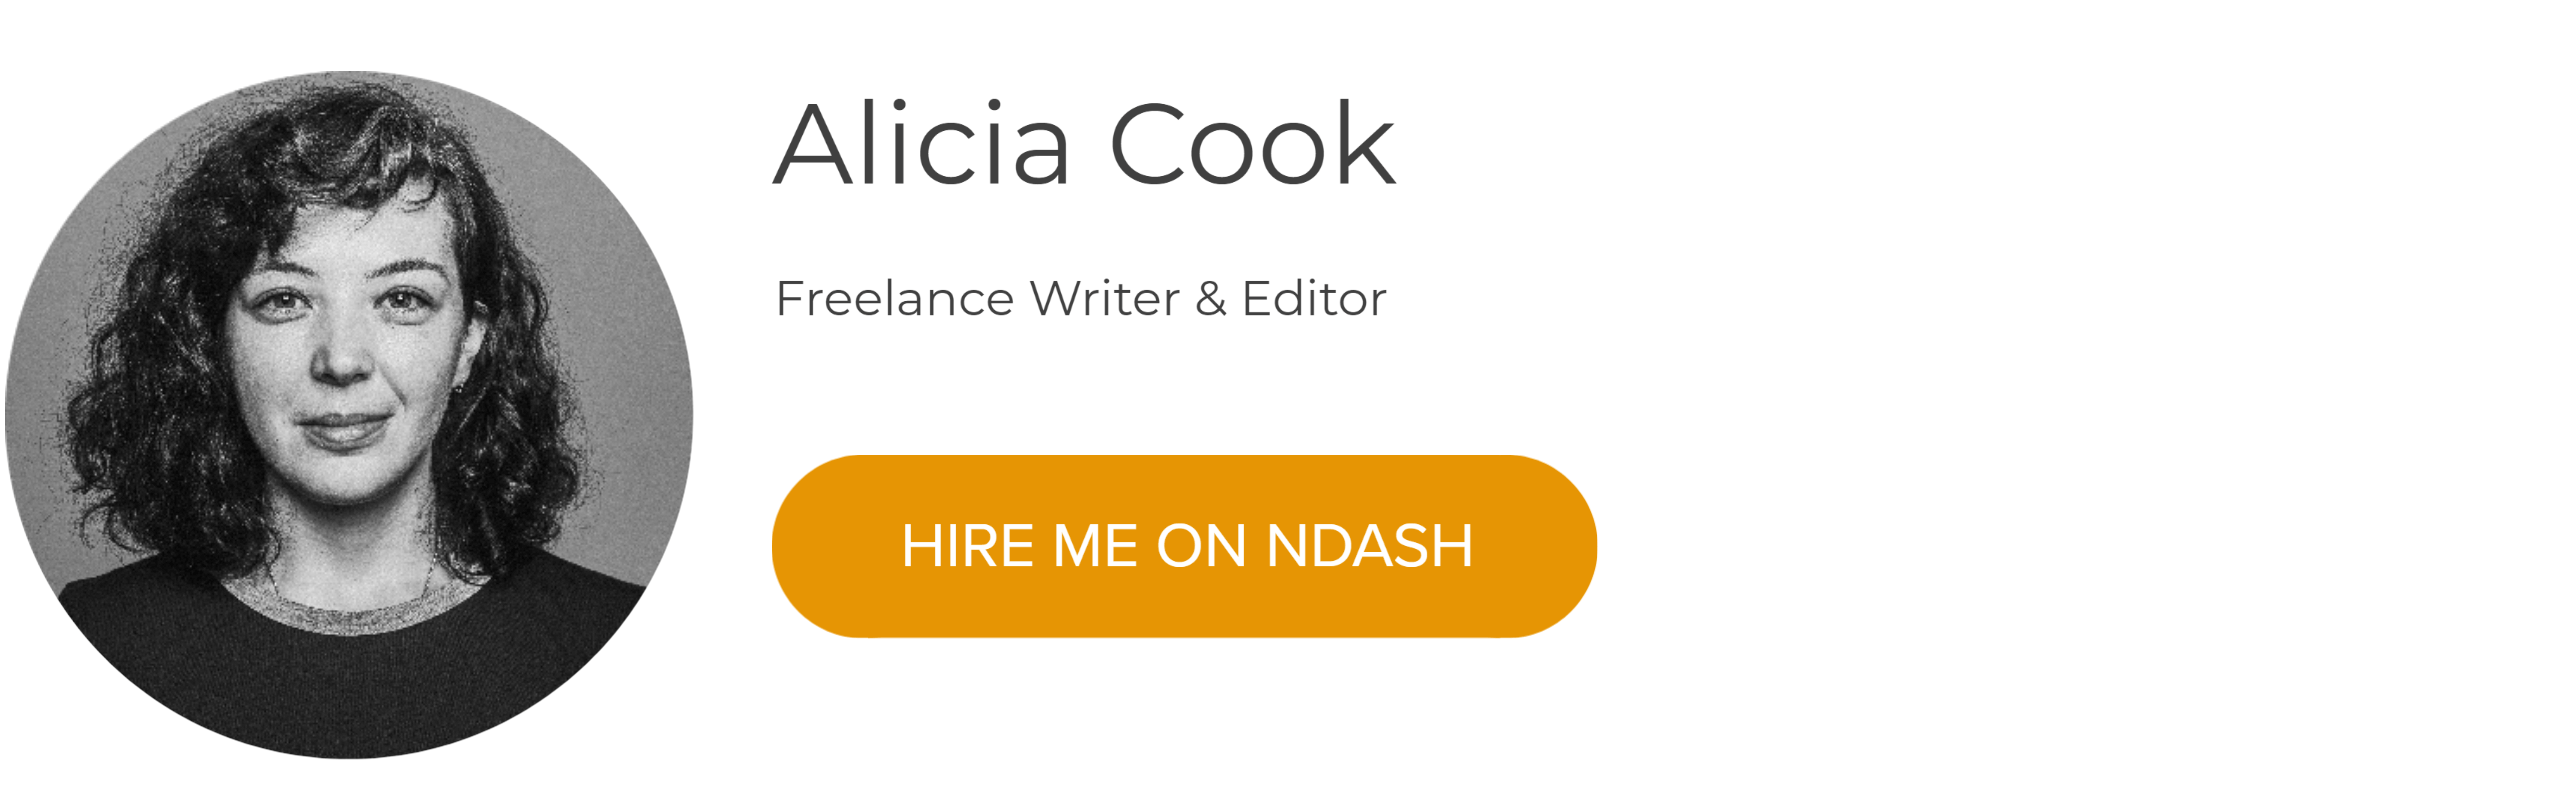 alicia cook freelance writer and editor